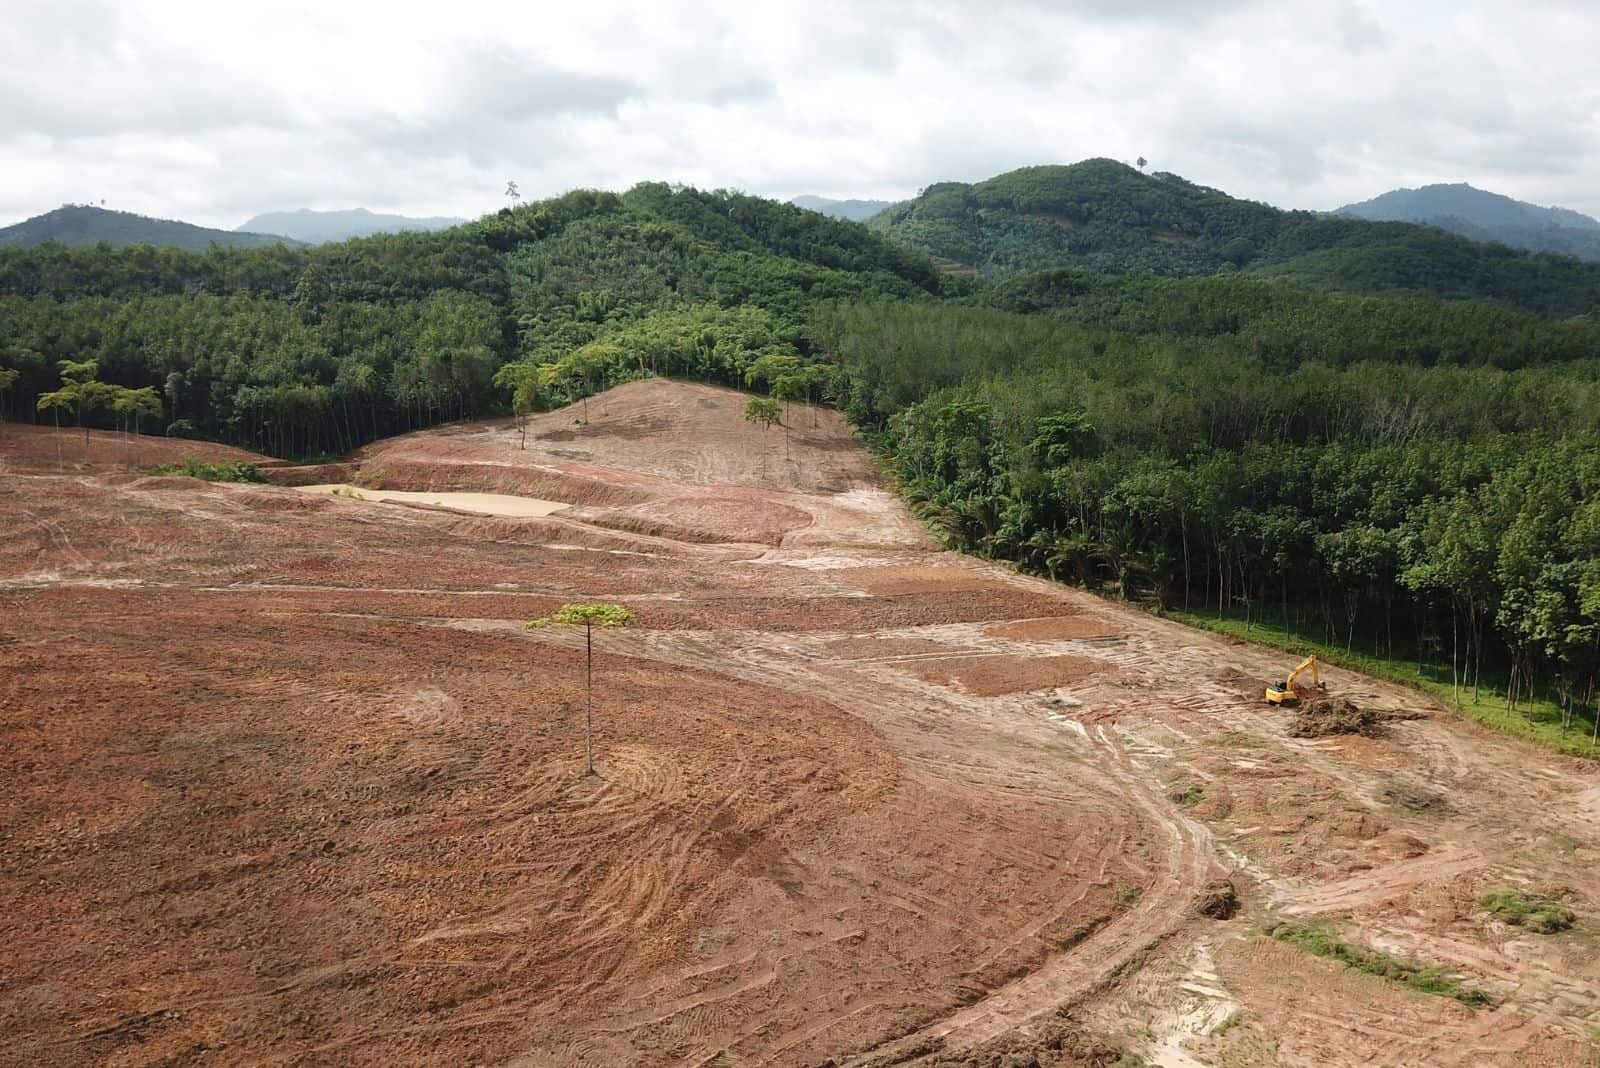 Here’s What A Forest Looks Like After Researchers Dumped Tons Of Coffee Waste Into It